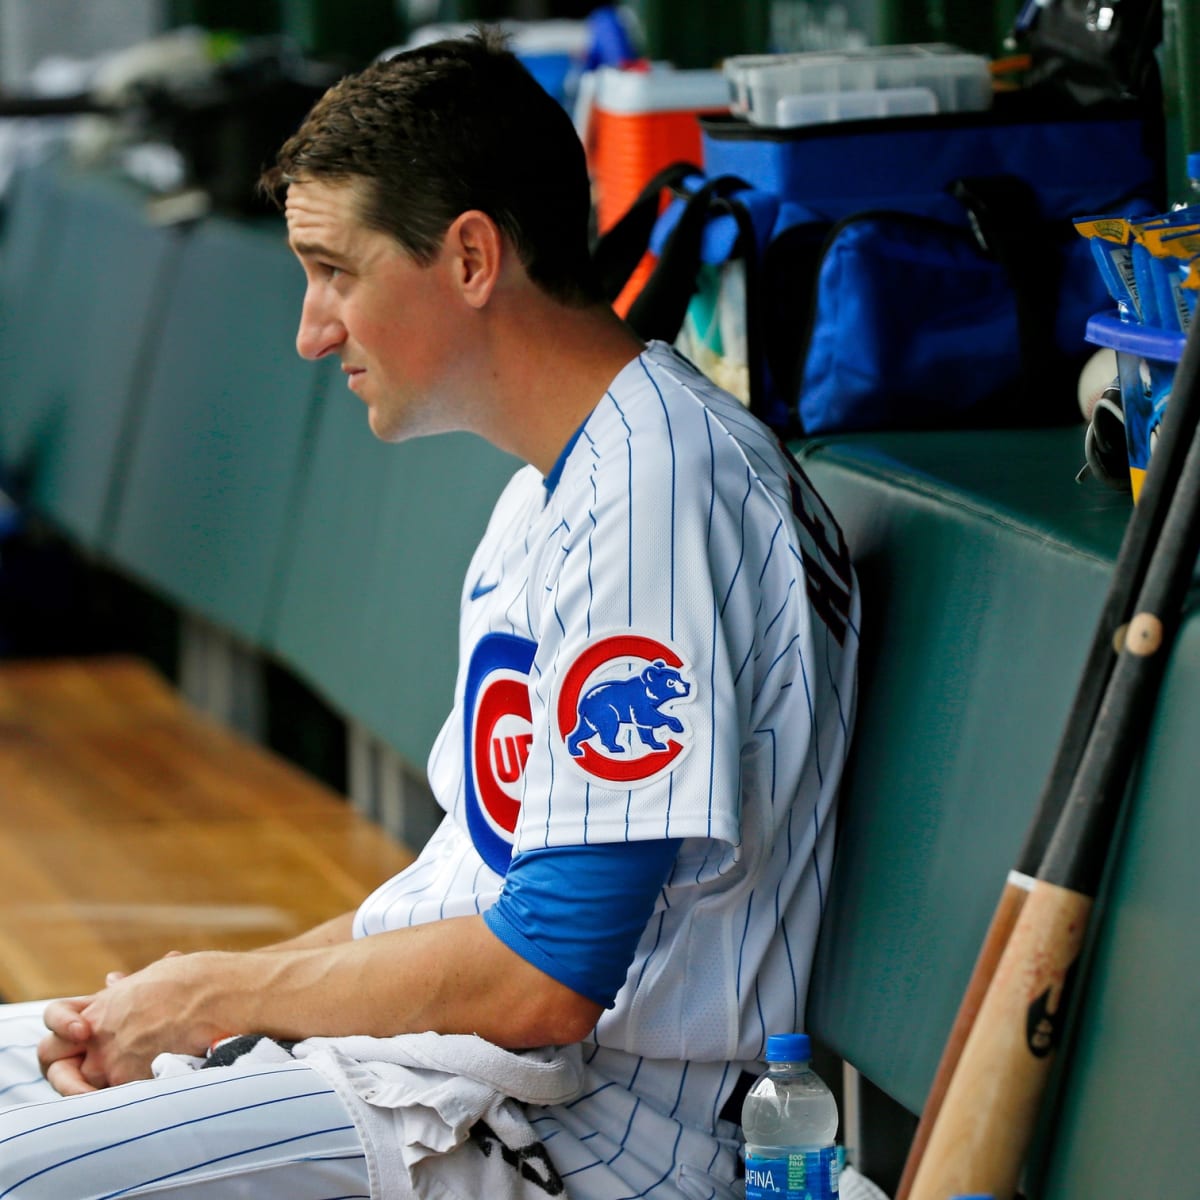 Cubs need Kyle Hendricks to be “The Professor” in 2022 - CHGO